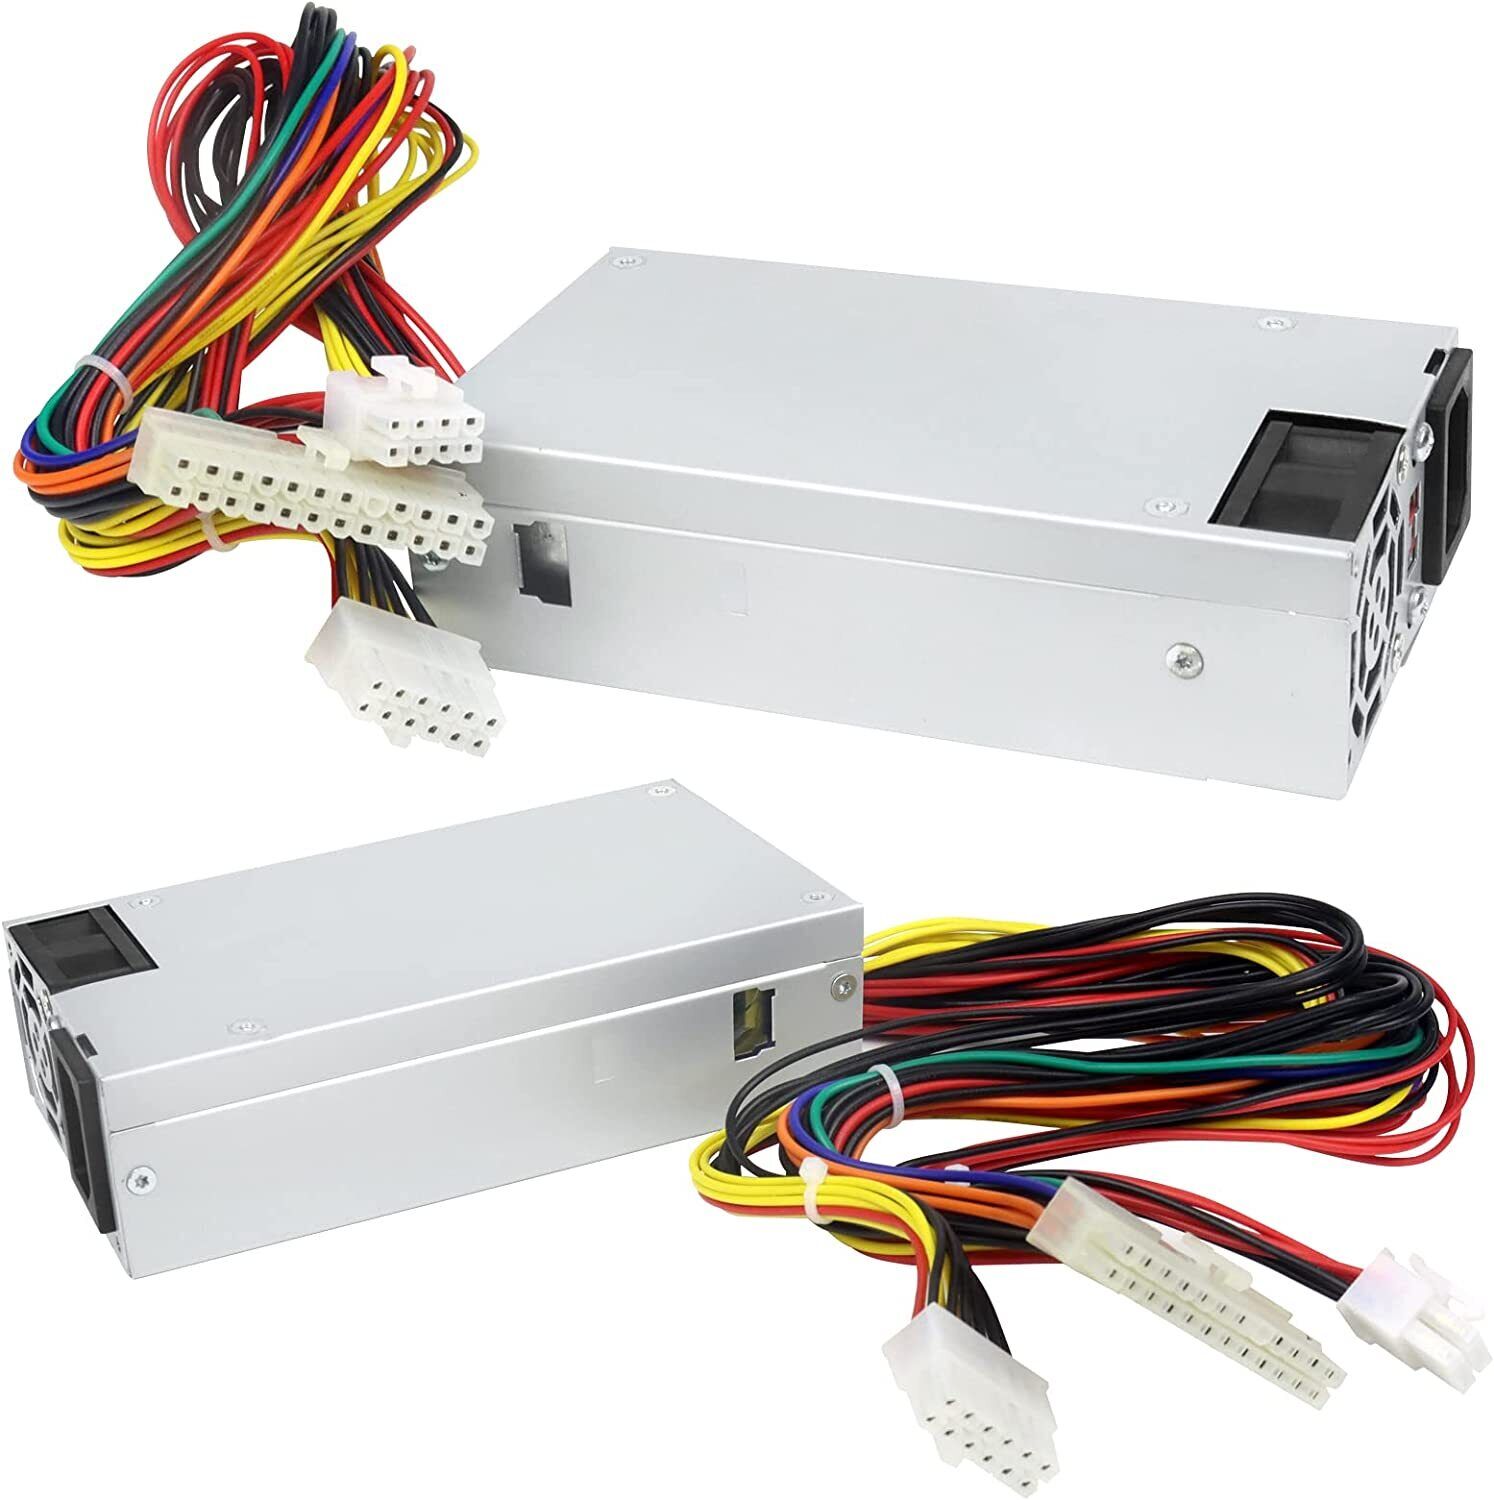 New 250W Power Supply For Synology DS1513+ DS1512+ DS1511+DS1815+ DS1812+DS1813+